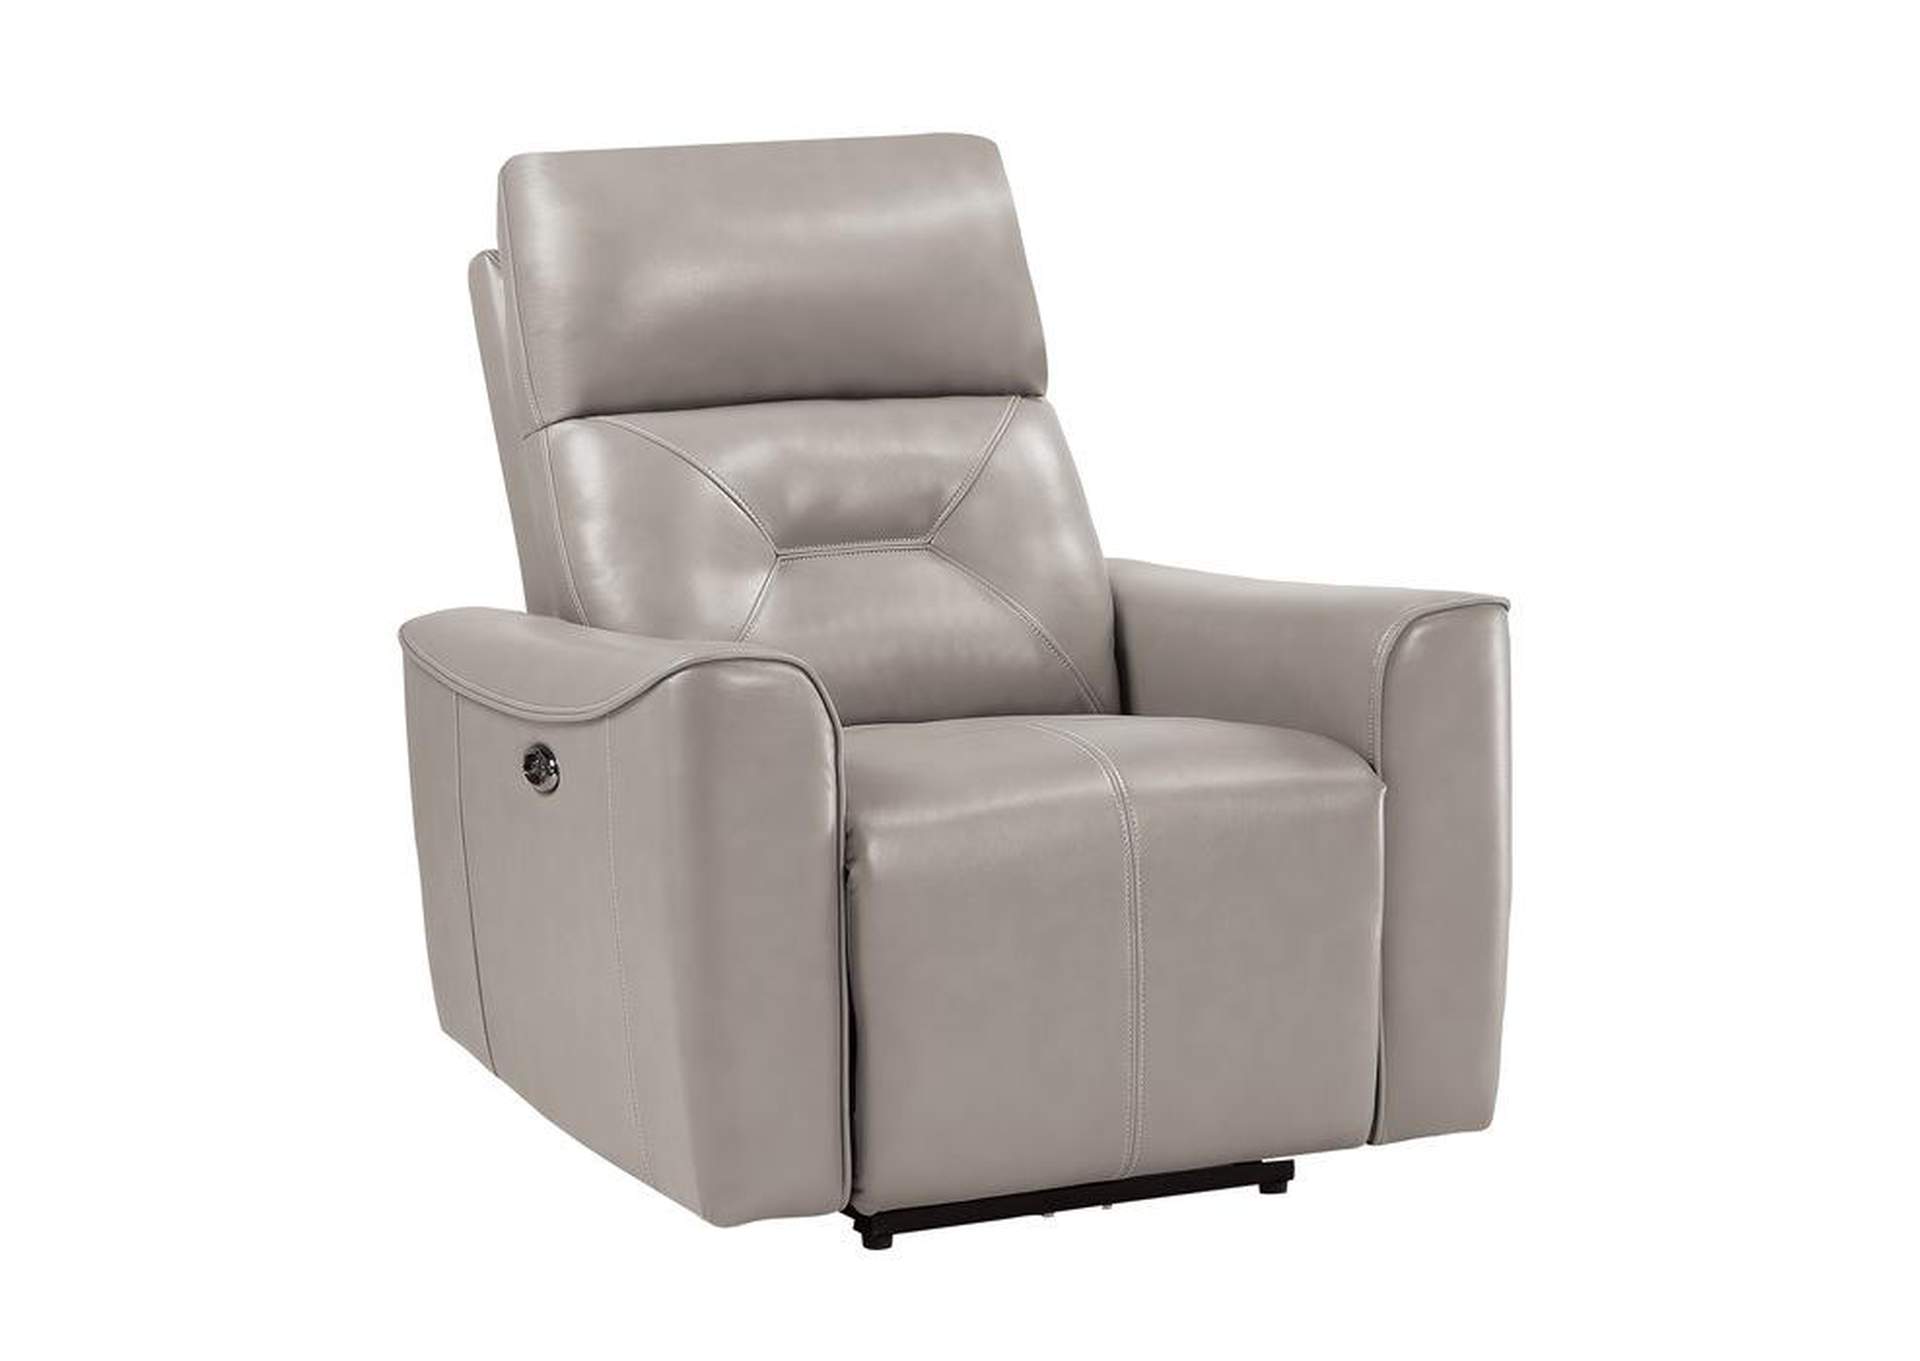 Burwell Power Reclining Chair With Usb Port,Homelegance